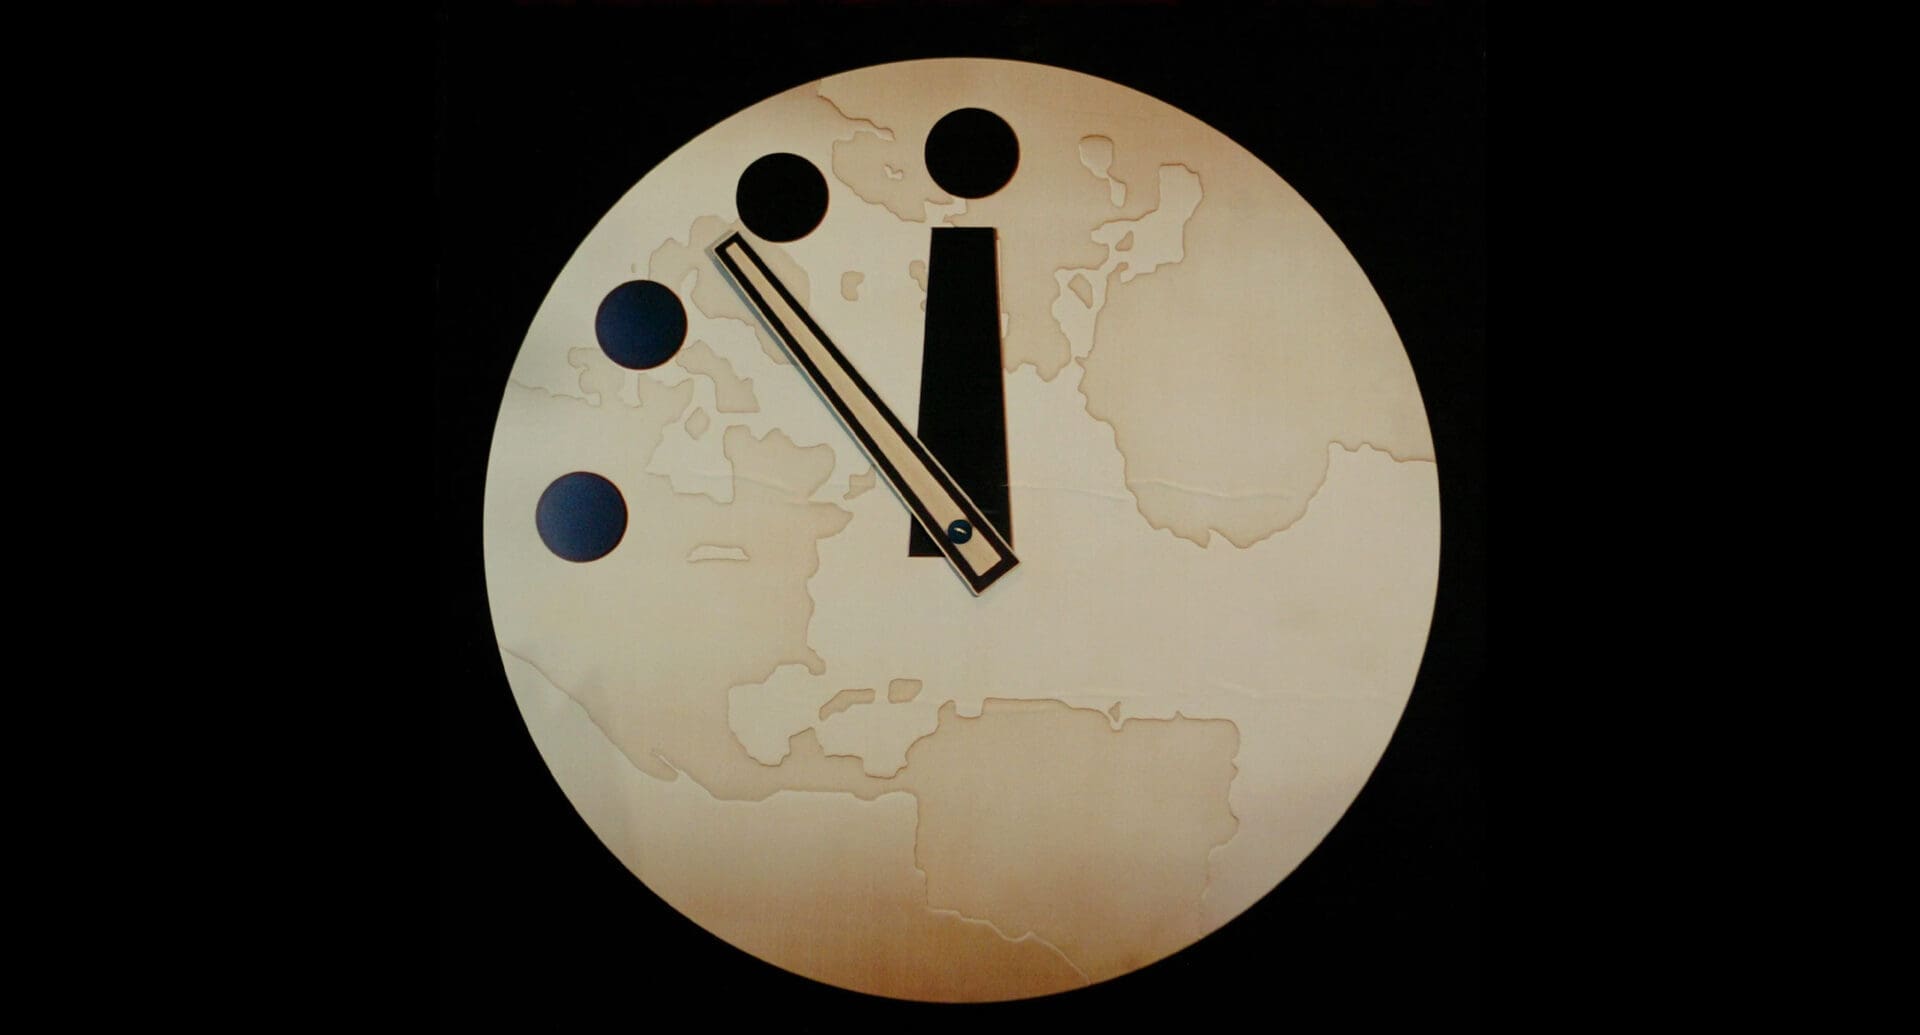 IN-DEPTH: The ominous history of the Doomsday Clock